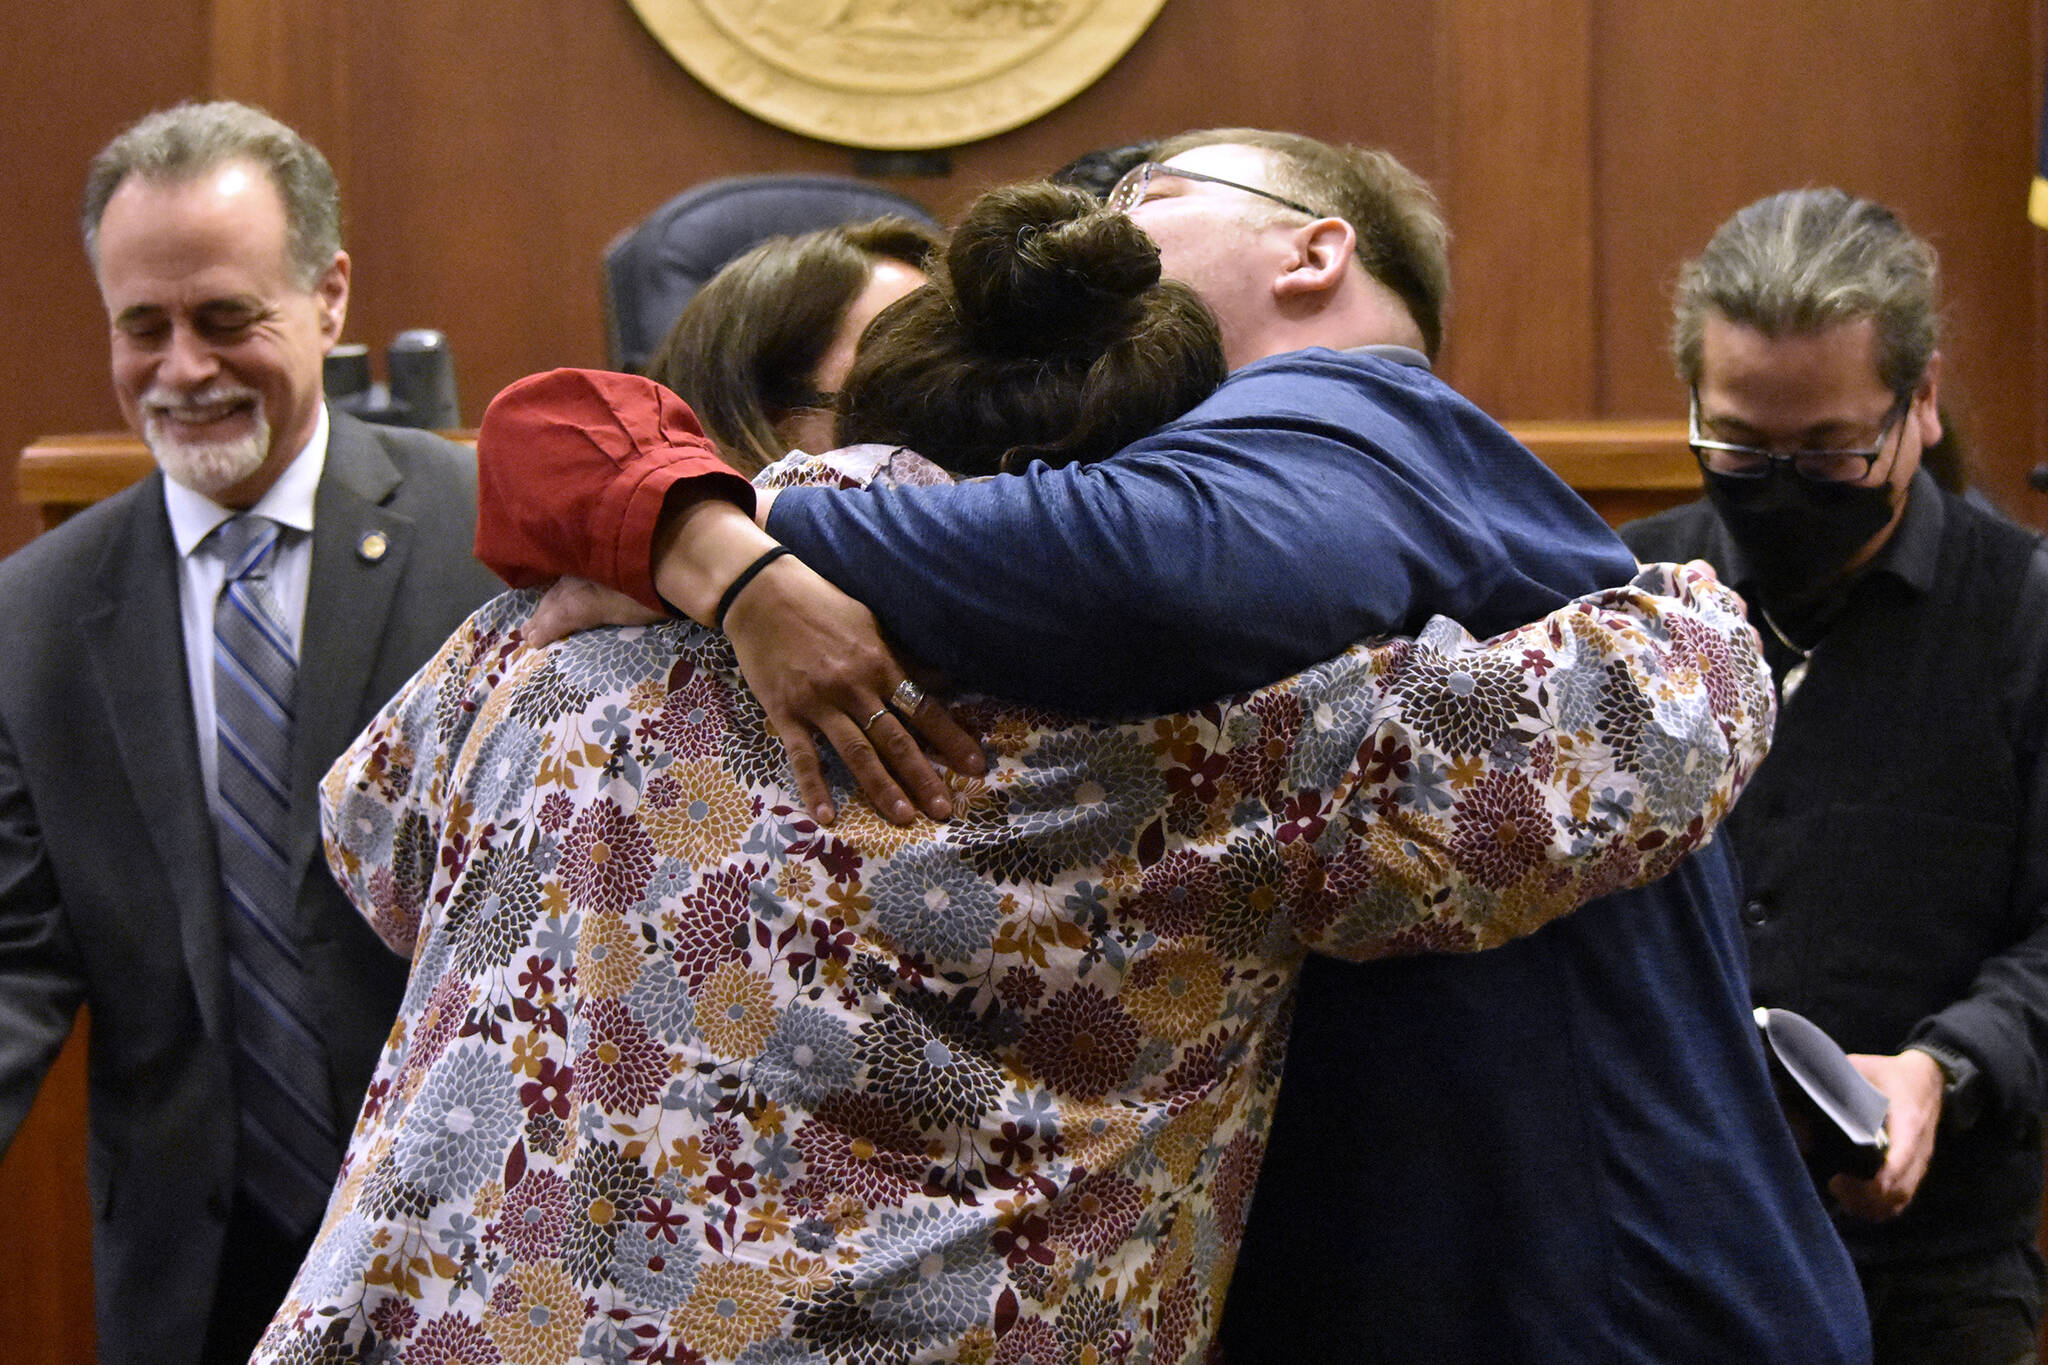 Peter Segall / Juneau Empire
Alaskans for Better Government members La quen náay Liz Medicine Crow, Richard Chalyee Éesh Peterson and ‘Wáahlaal Gidáak Barbara Blake embrace on the floor of the Alaska State Senate following the passage of House Bill 123, a bill to formally recognize the state’s 229 federally recognized tribes.